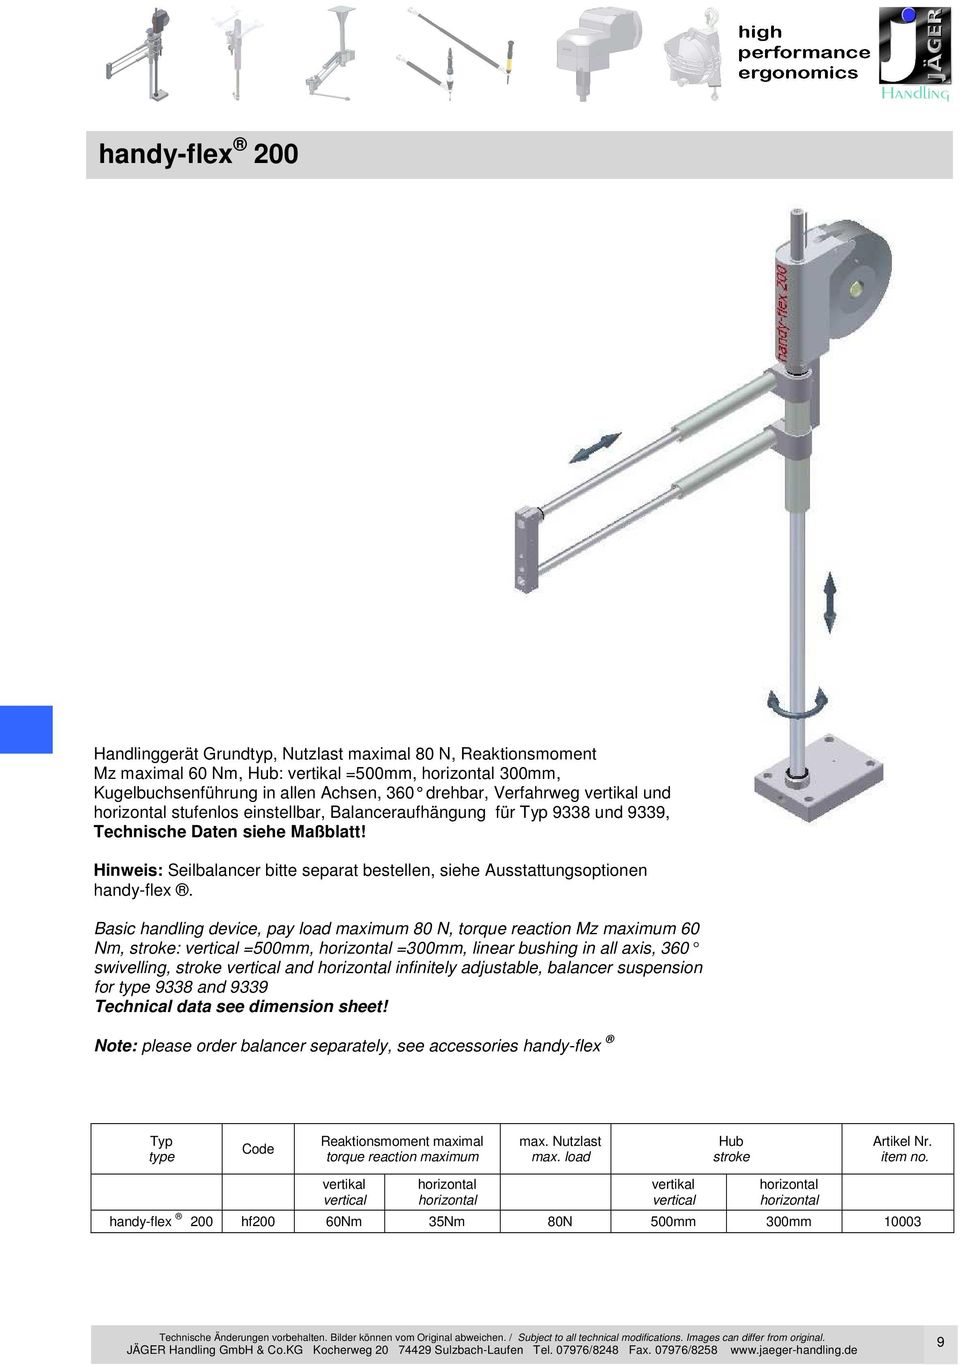 Basic handling device, pay load maximum 80 N, torque reaction Mz maximum 60 Nm, stroke: vertical =500mm, =300mm, linear bushing in all axis, 360 swivelling, stroke vertical and infinitely adjustable,